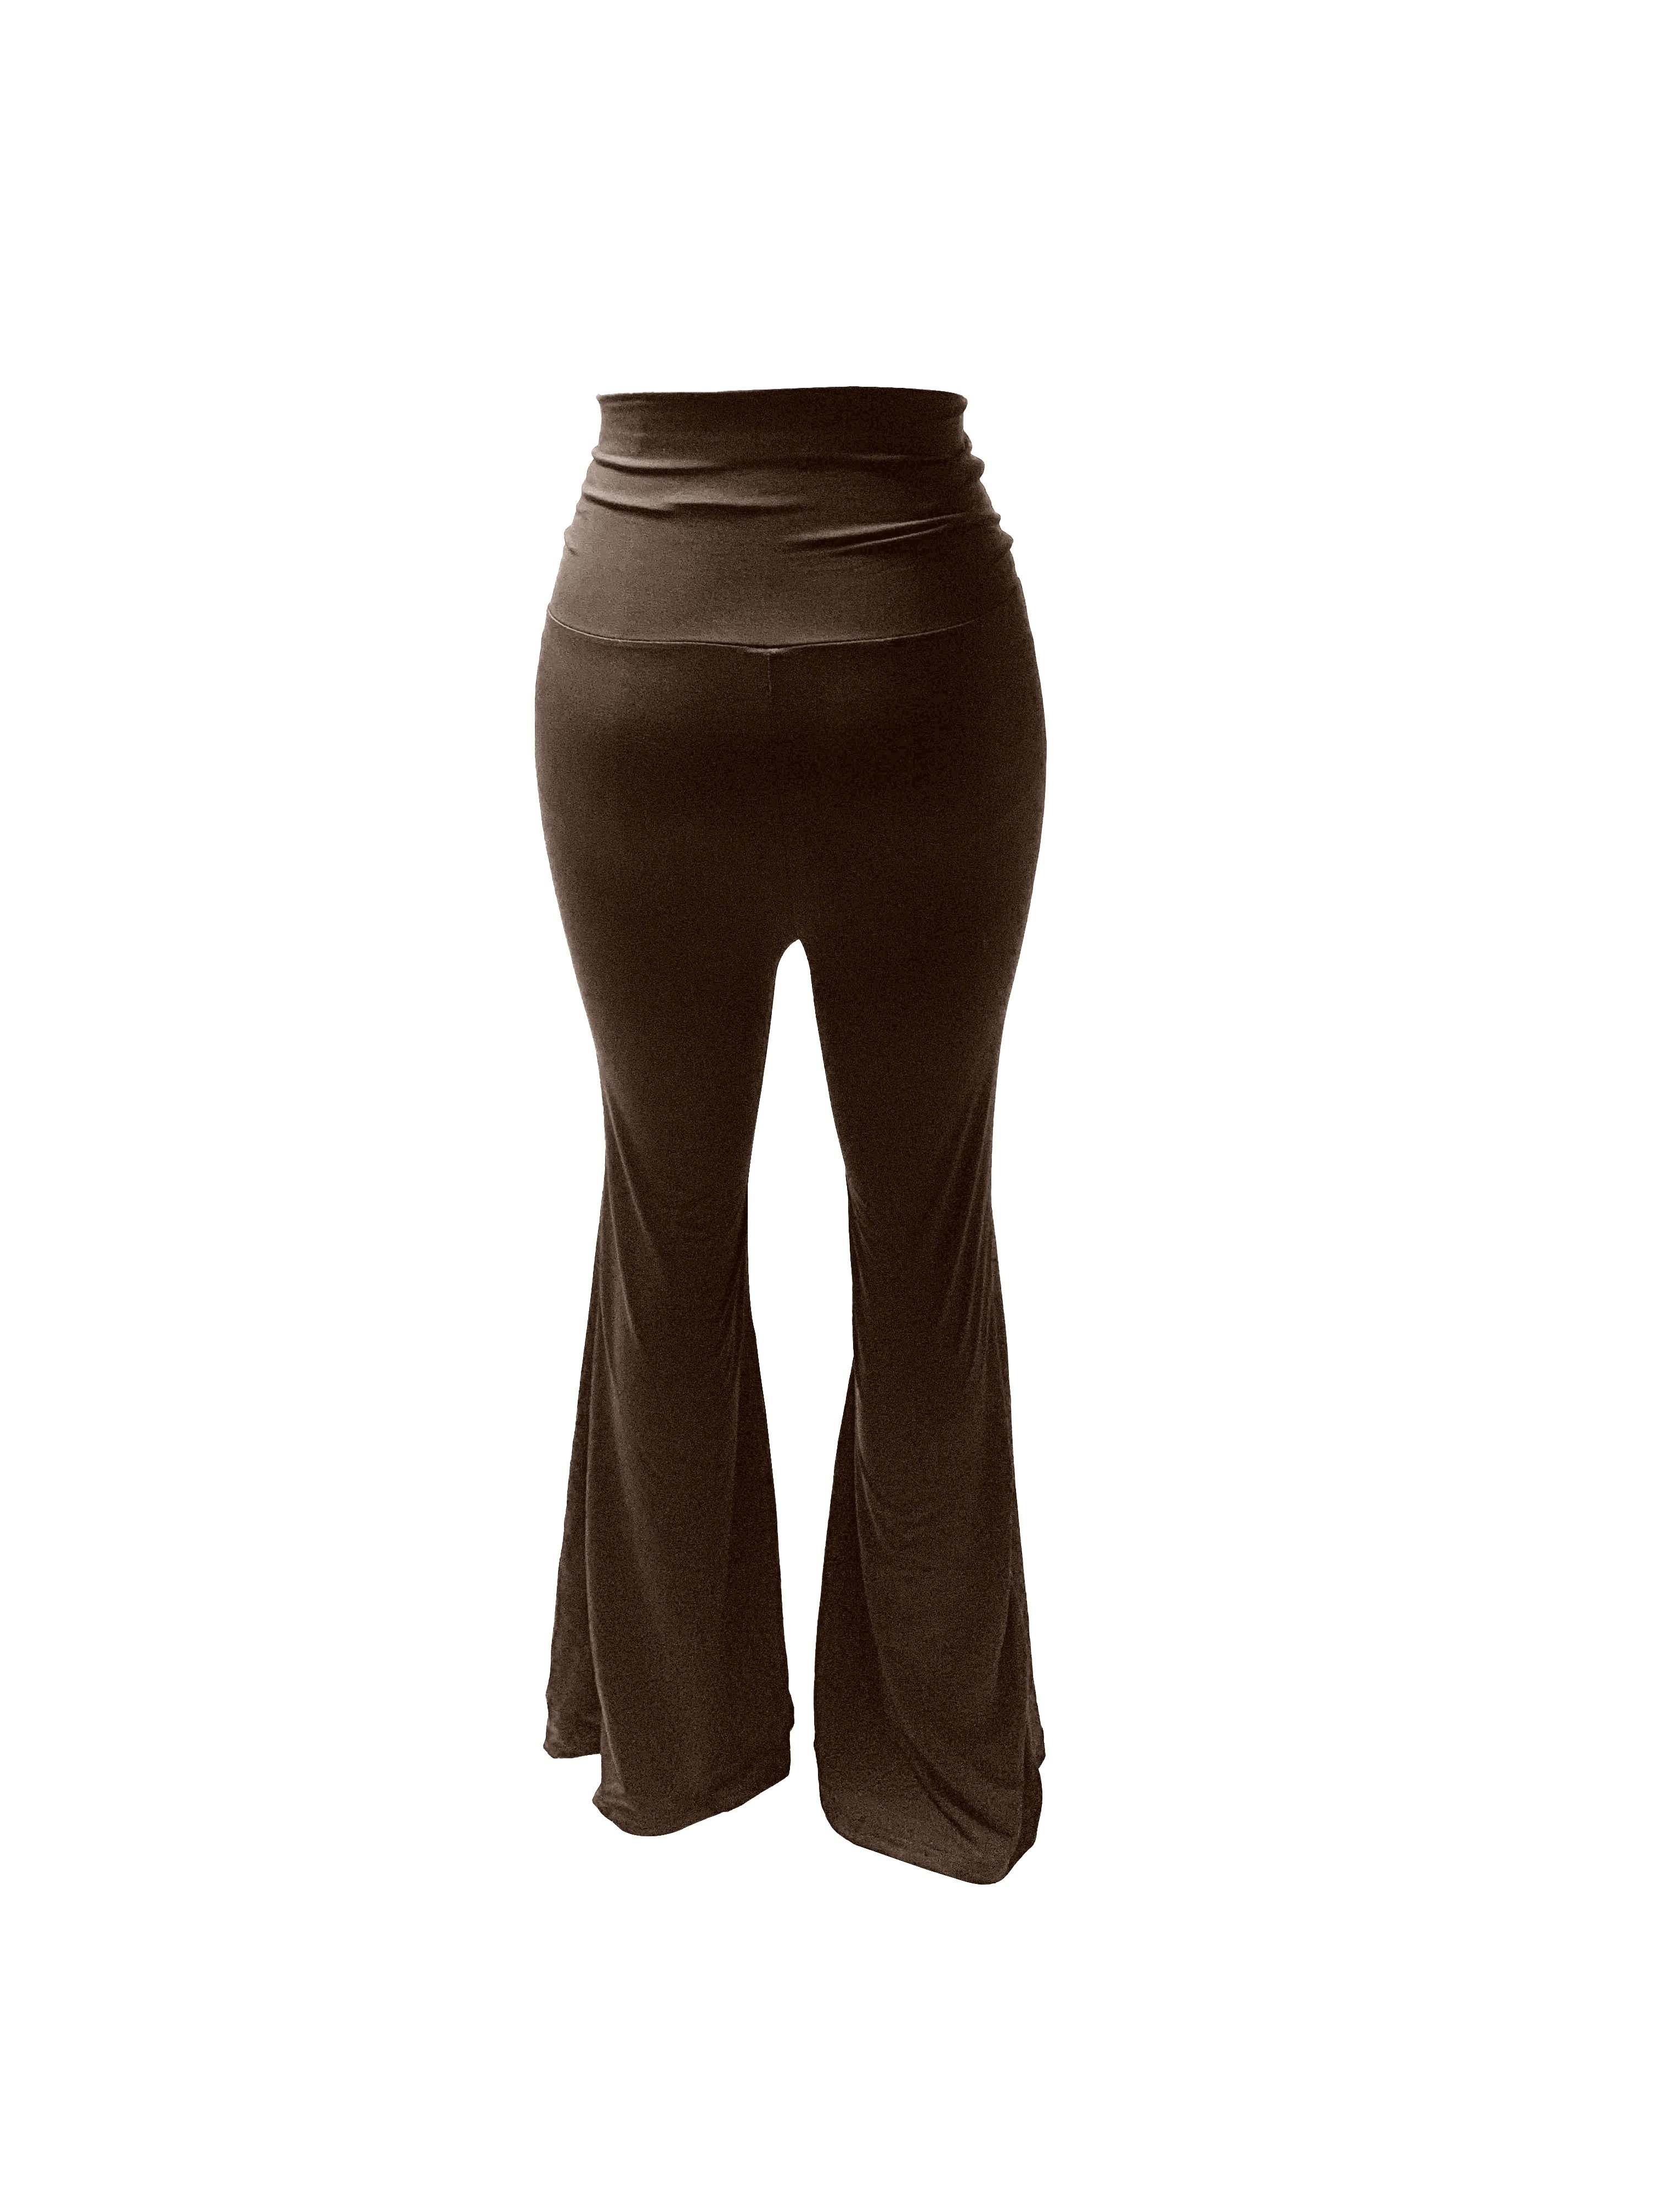 Chocolate Flare Boho Pants Skirt Dance Yoga Pants Women Brown Yoga Clothes  Festival Tribal Pants With Skirt Low Fit Flared Trousers -  Canada